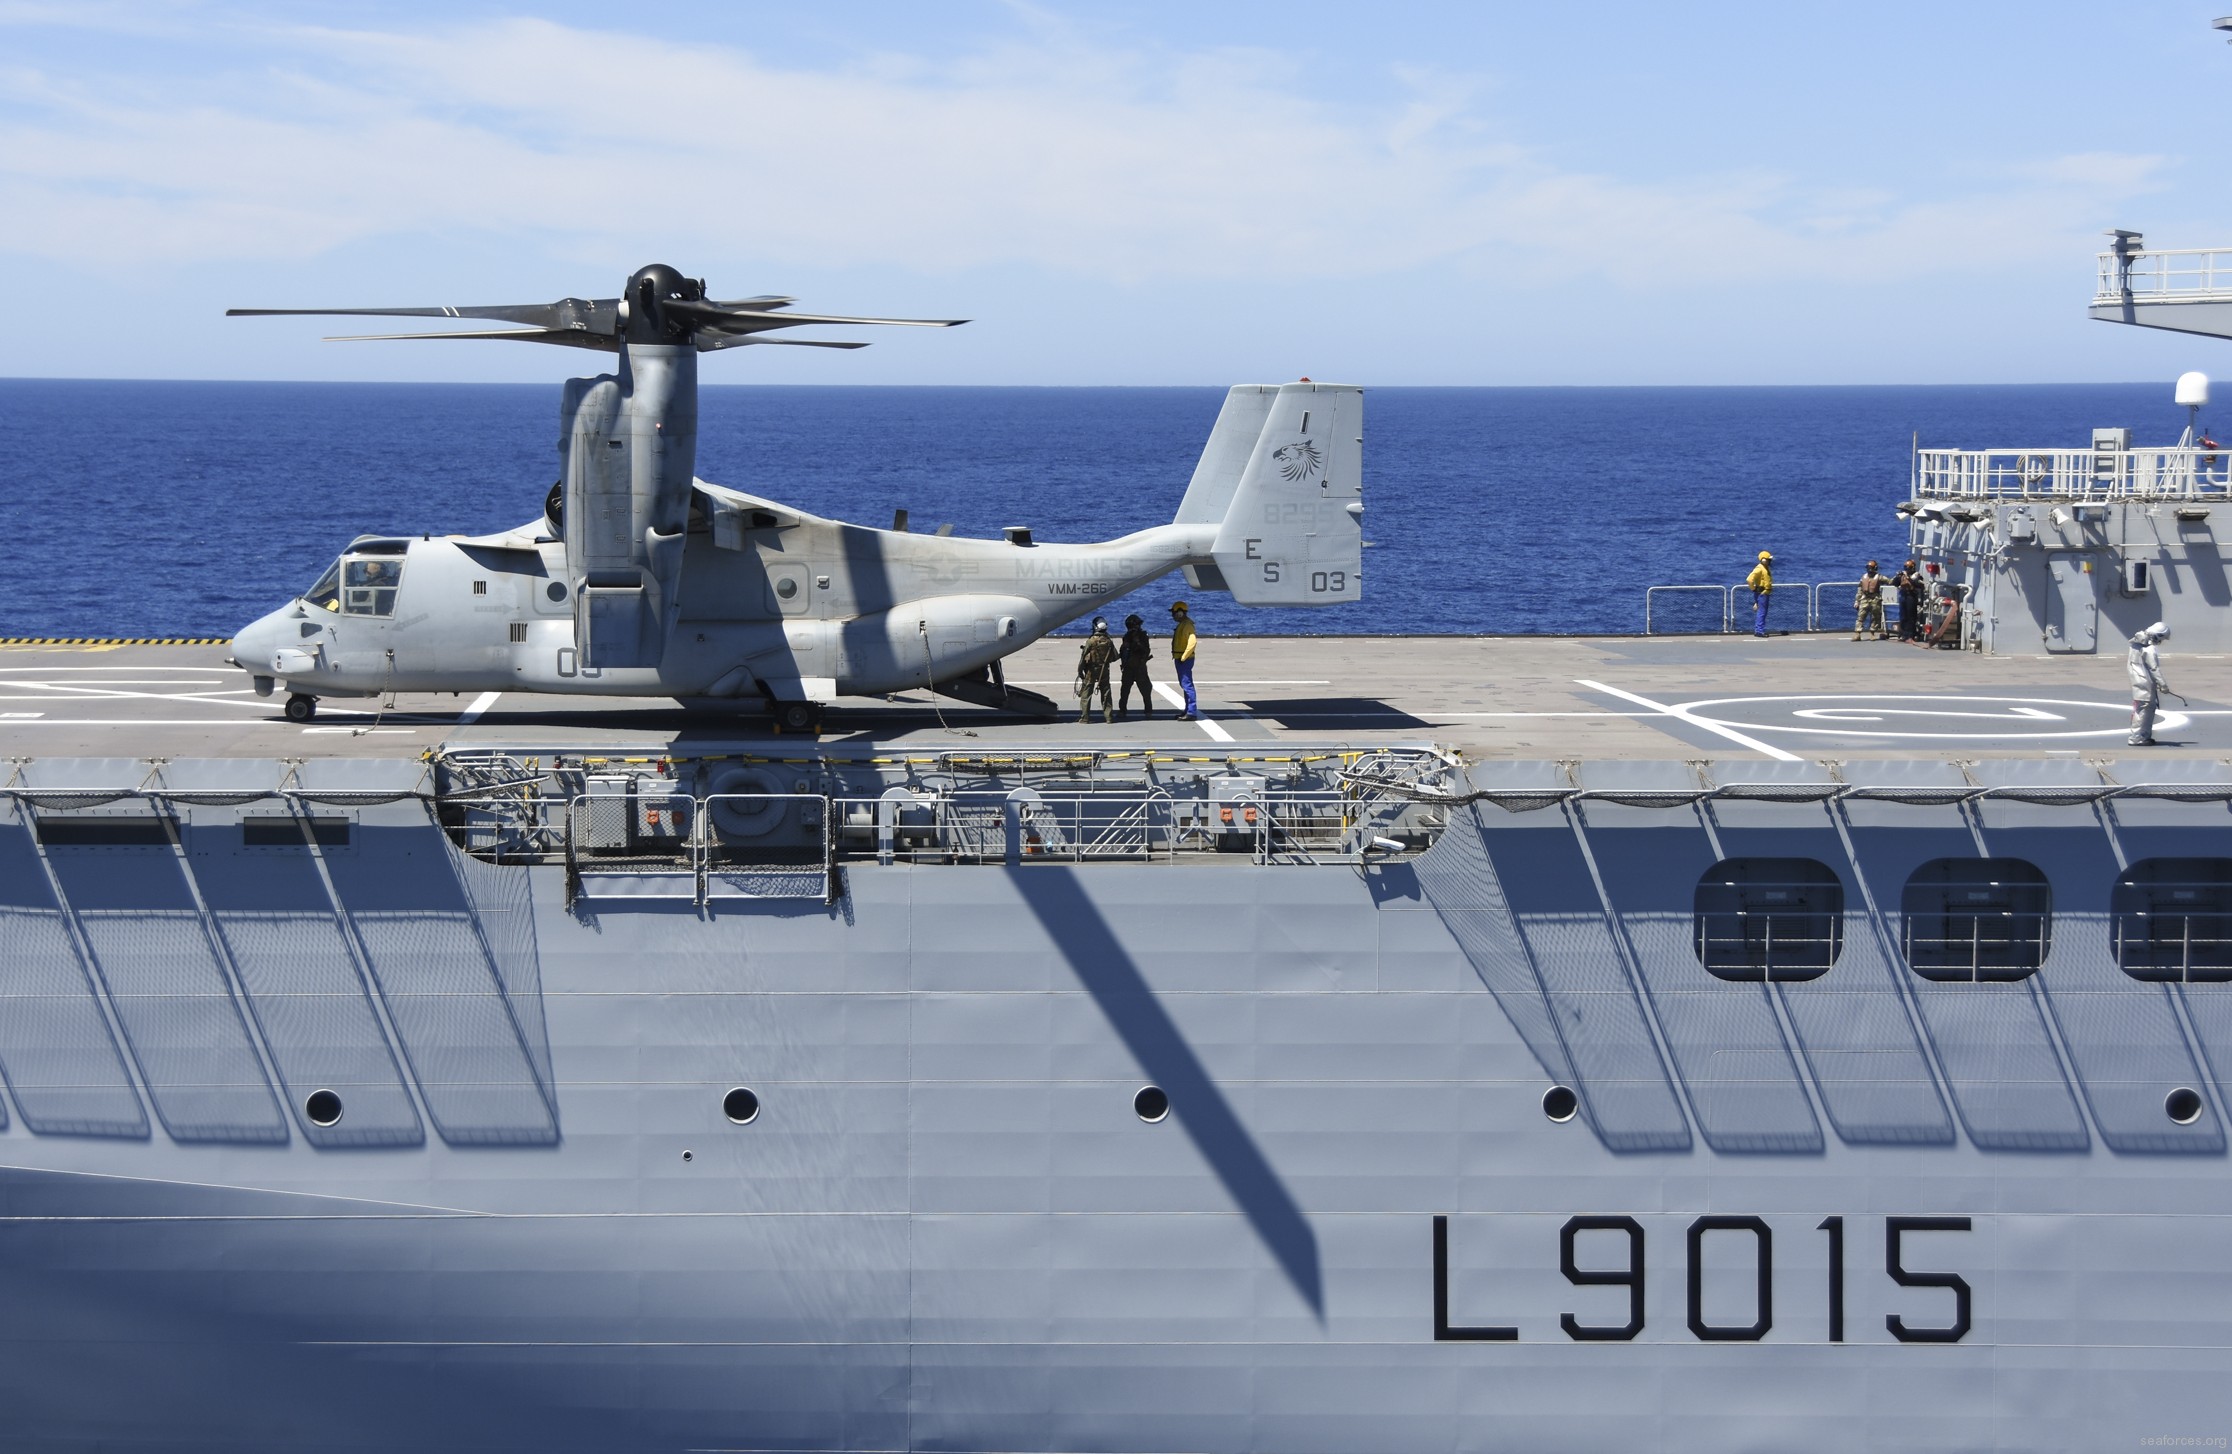 l-9015 fs dixmude mistral class amphibious assault command ship bpc french navy marine nationale 40 mv-22b osprey us marine corps